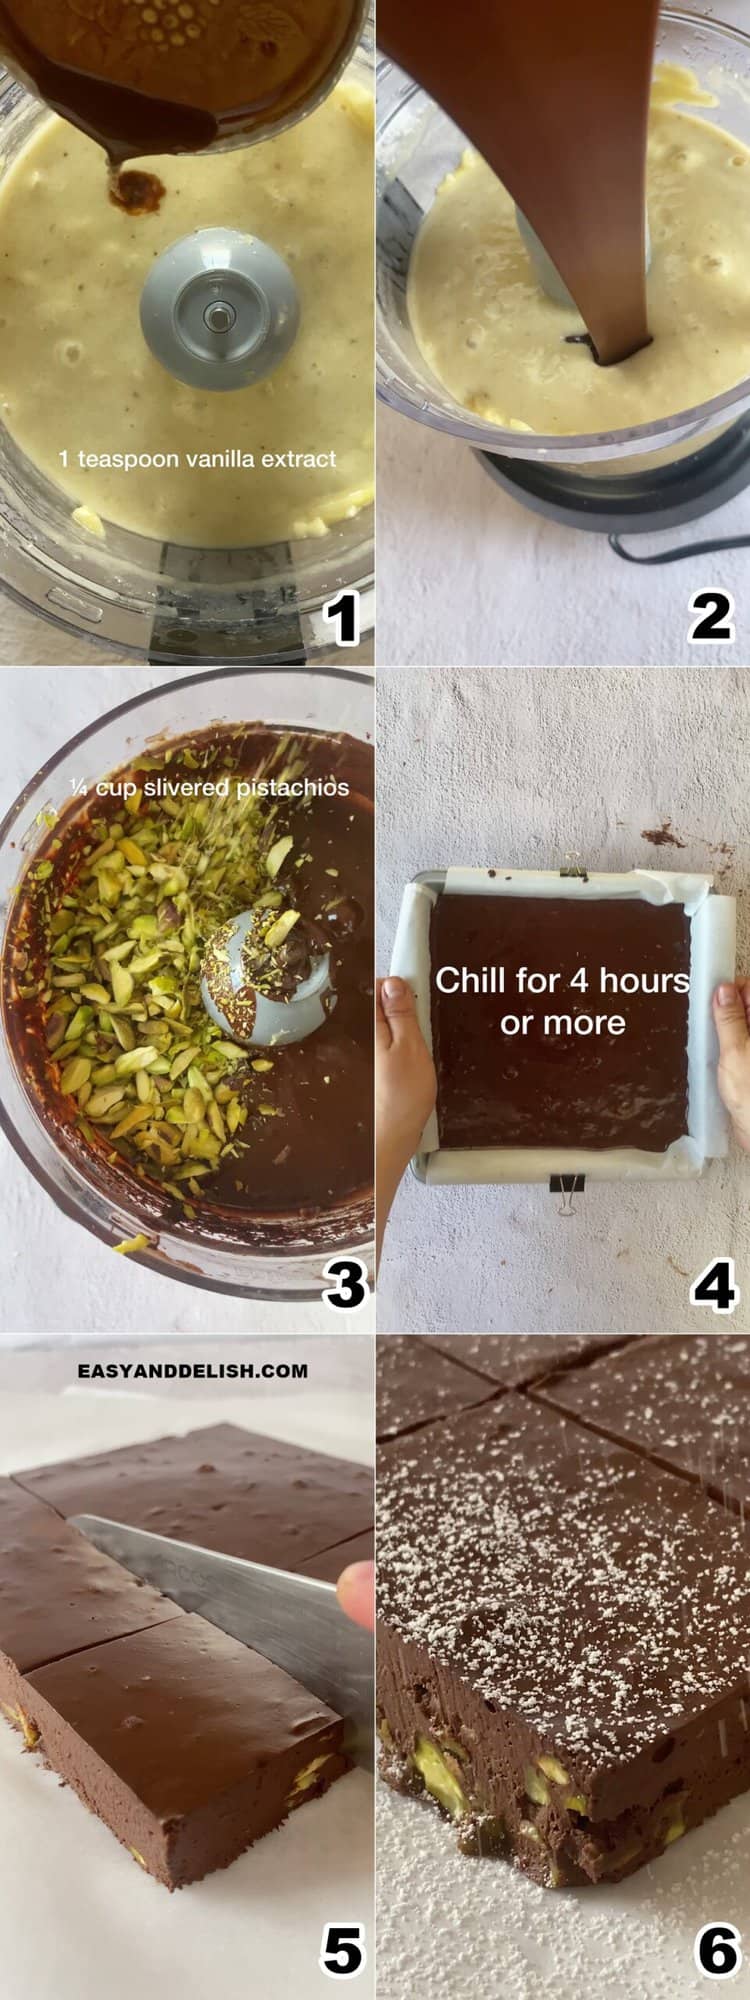 step by step recipe instructions.